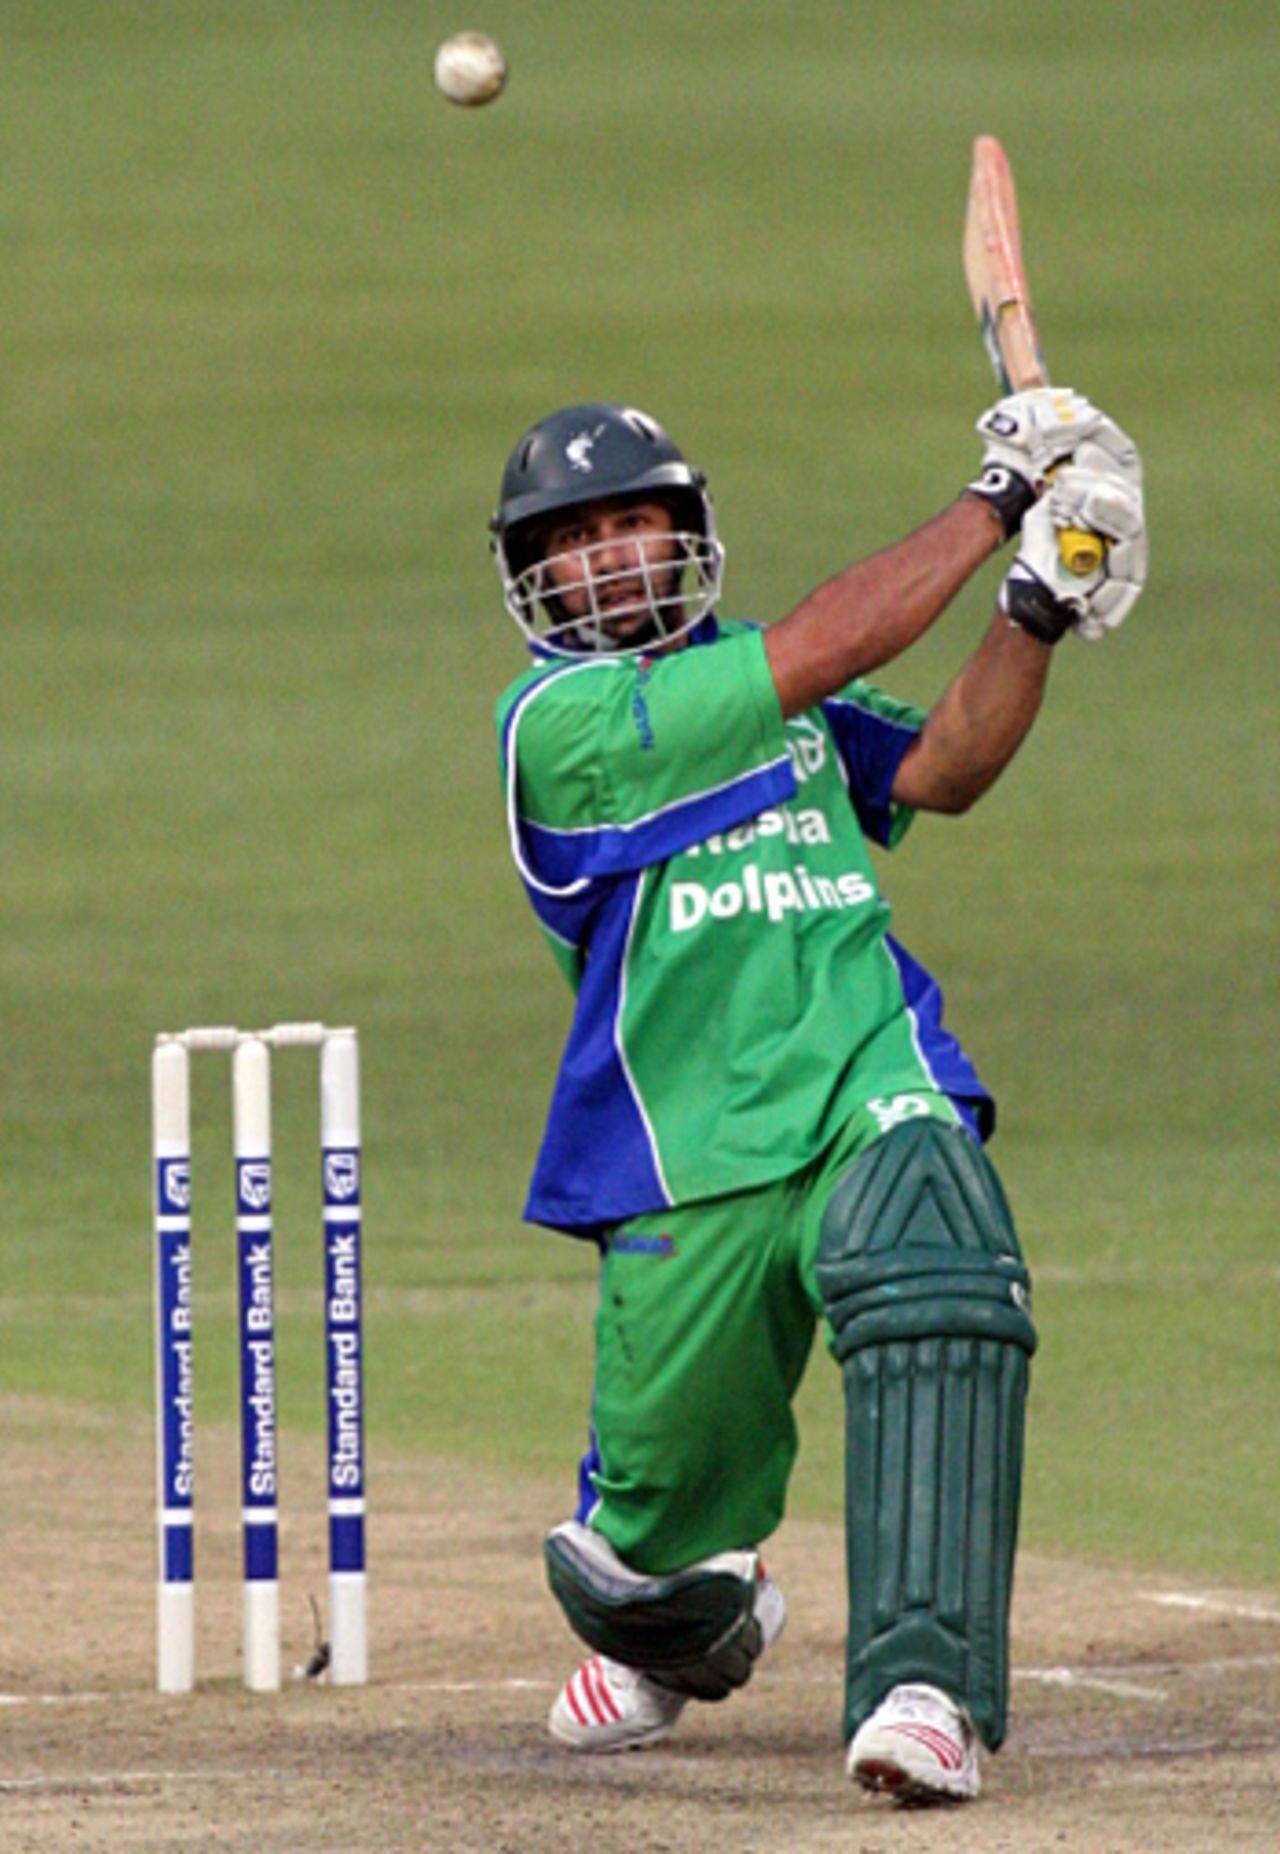 Ahmed Amla on his way to 71*, Dolphins v Eagles, Durban, December 21, 2005